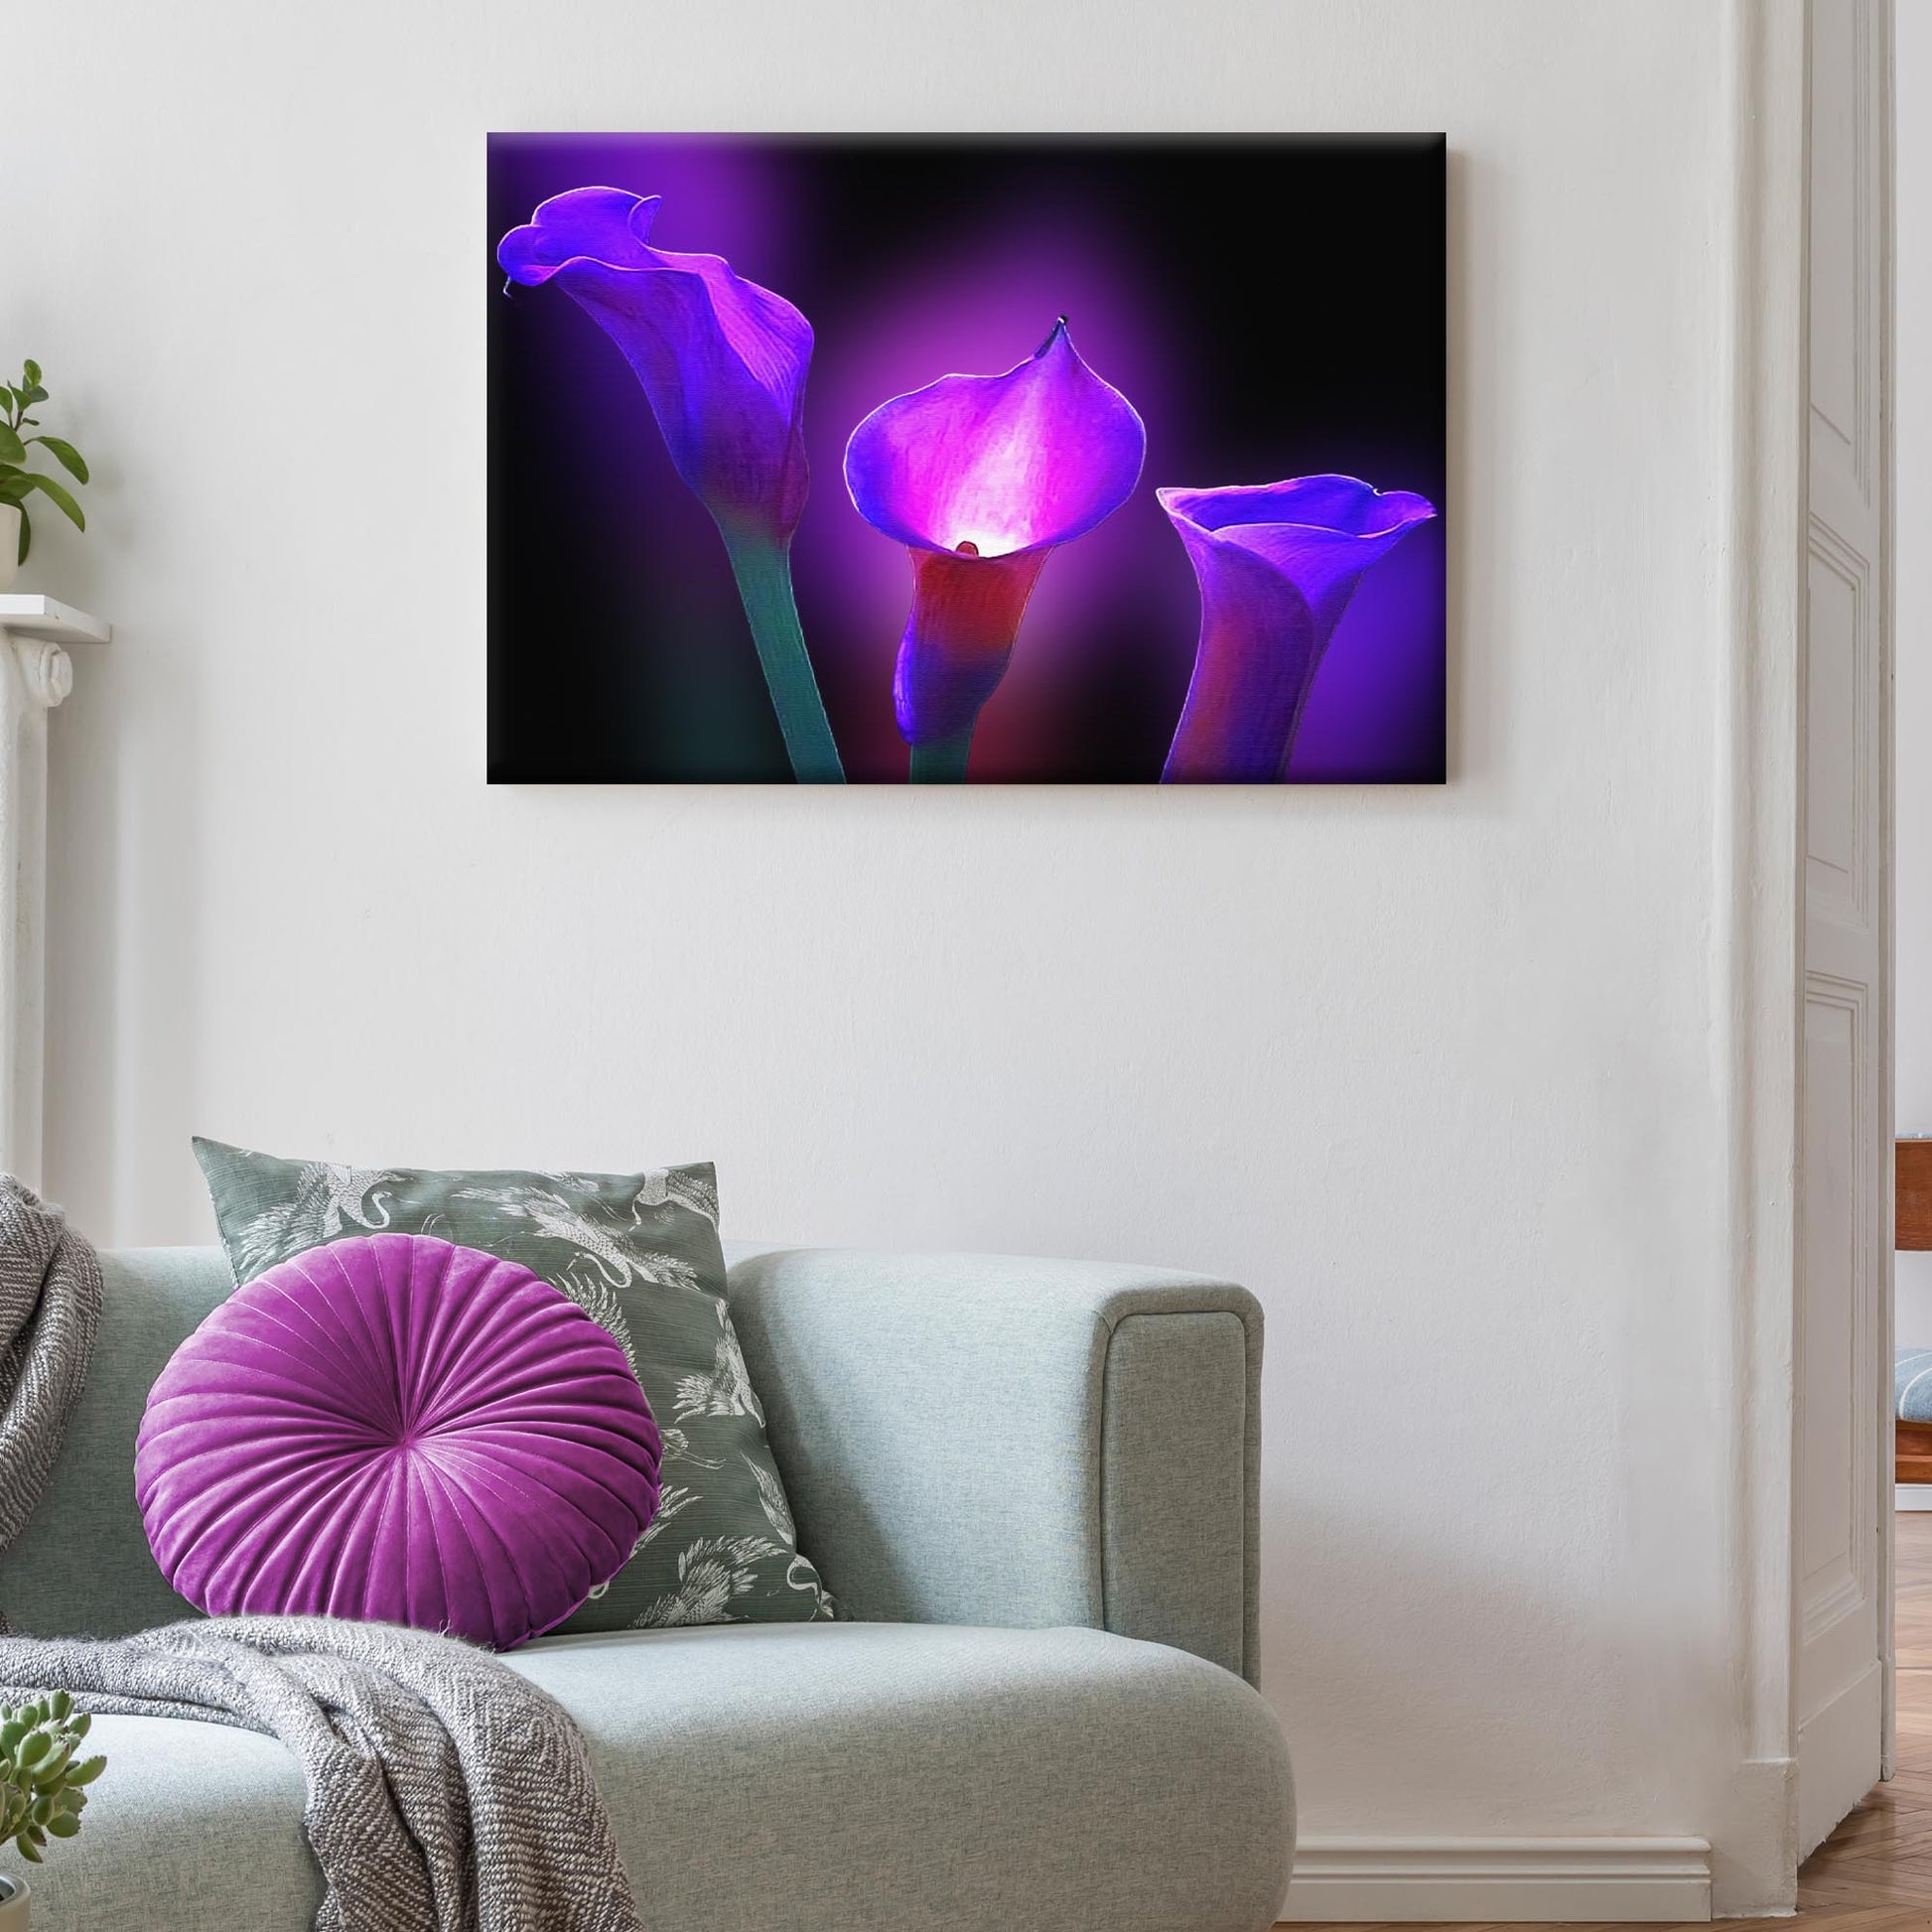 Flowers Purple Calla Lily Canvas Wall Art - Image by Tailored Canvases